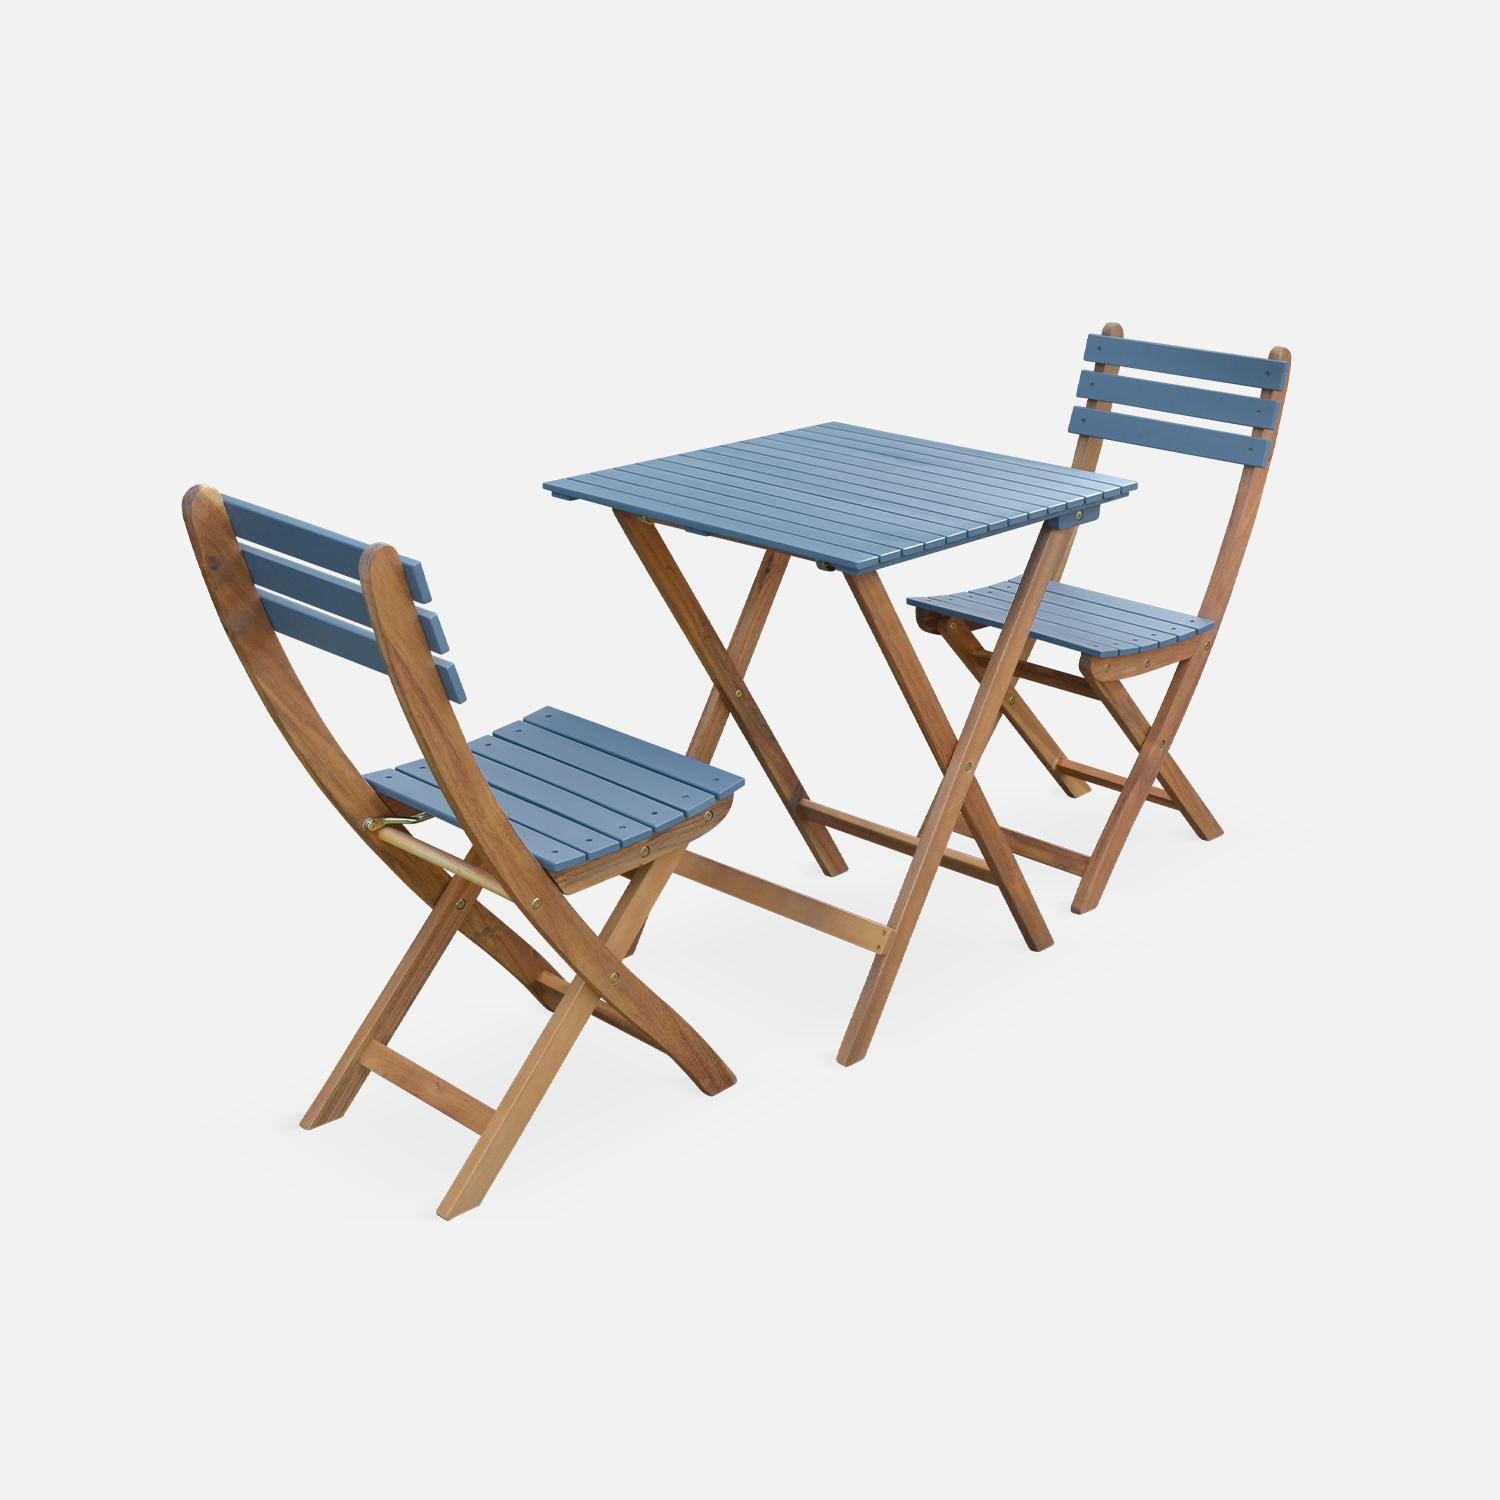 2-seater foldable wooden bistro garden table with chairs, 60x60cm - Barcelona - Grey Blue,sweeek,Photo4